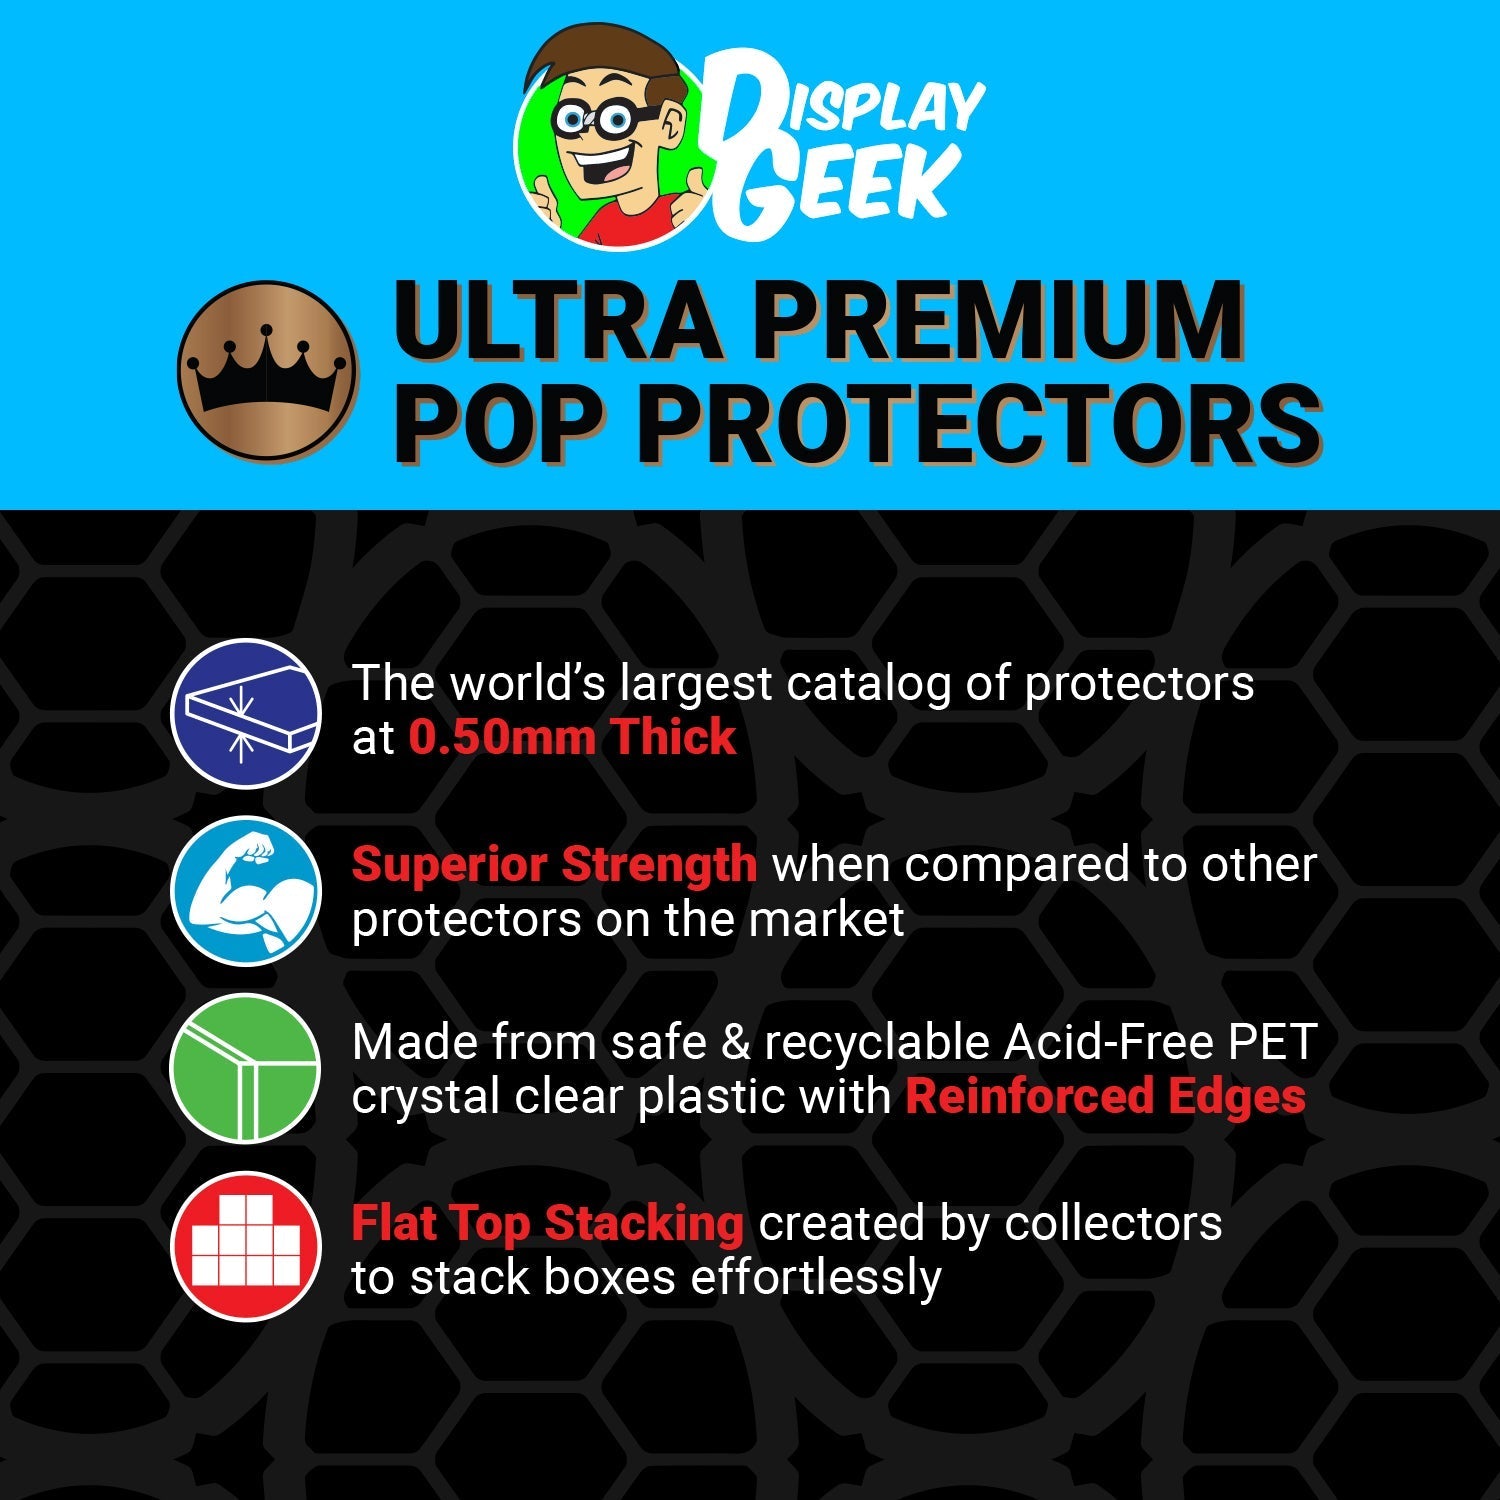 Pop Protector for Hulk Smashing Loki #362 Funko Pop Movie Moments - PPG Pop Protector Guide Search Created by Display Geek